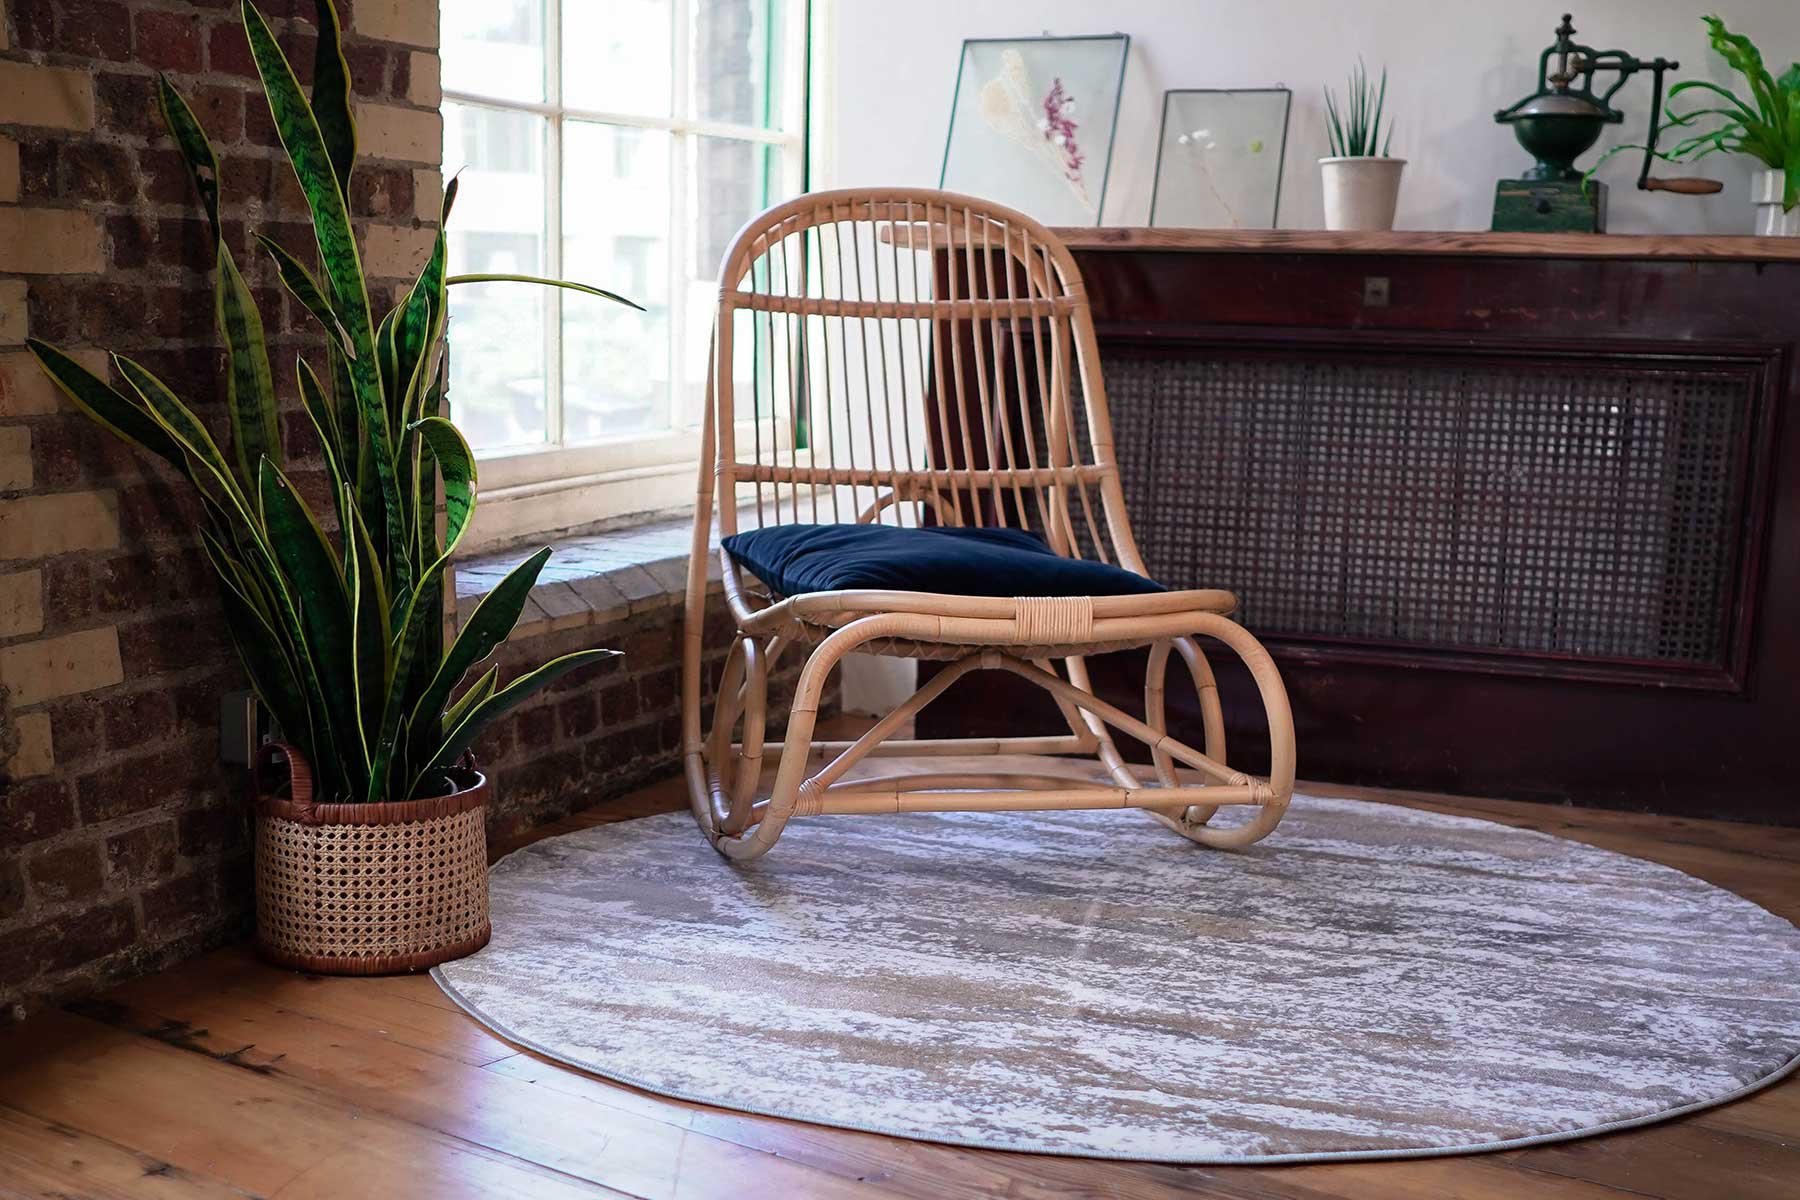 Using Round Rugs in Unexpected Ways